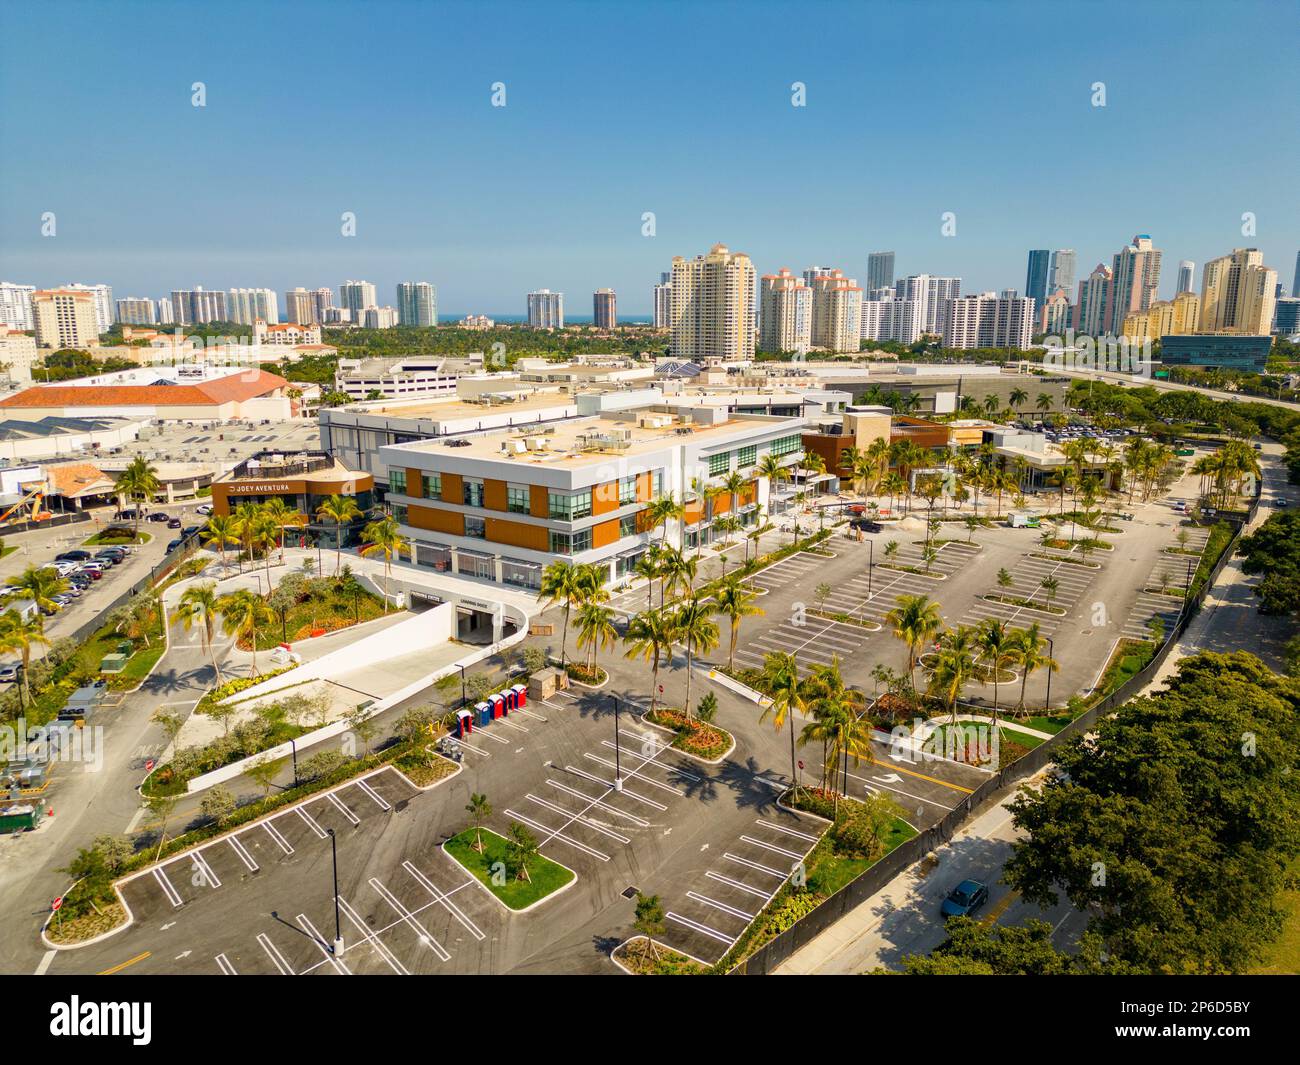 Aventura mall expansion a treat for shoppers (Photos) - South Florida  Business Journal